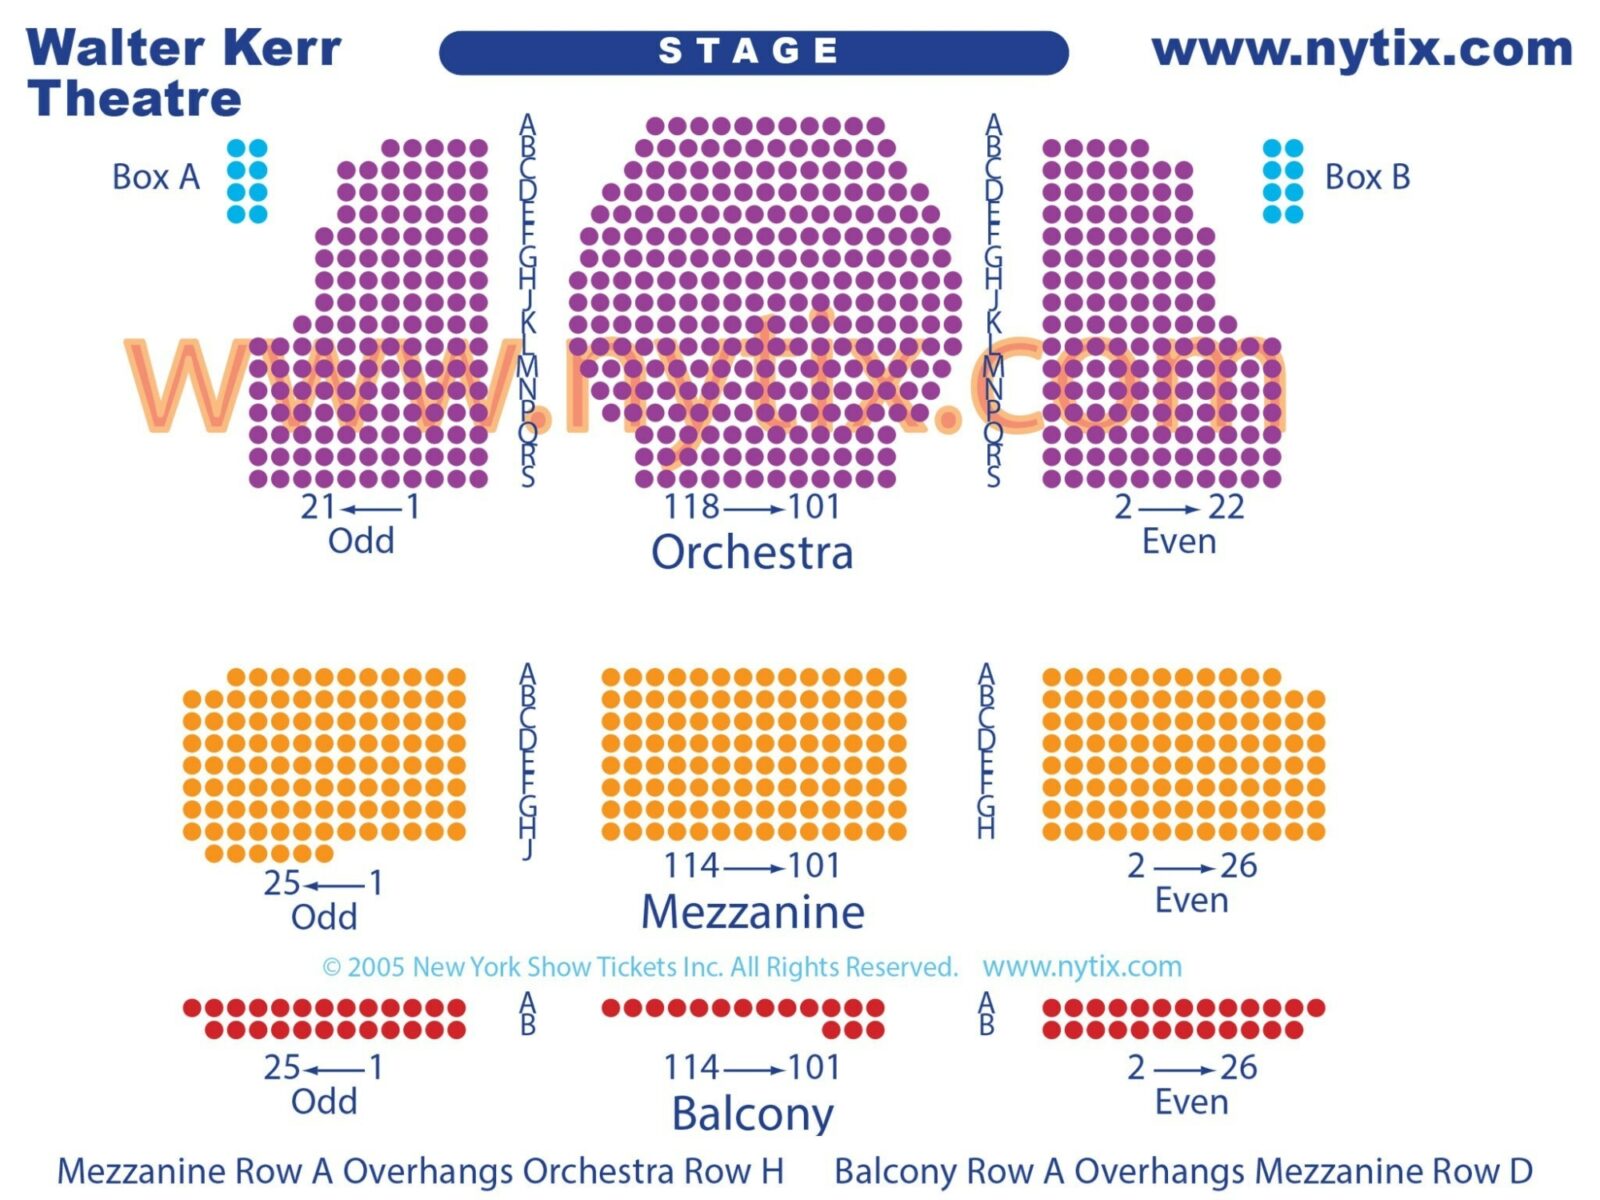 Walter Kerr Theatre Bruce Springsteen Seating Chart